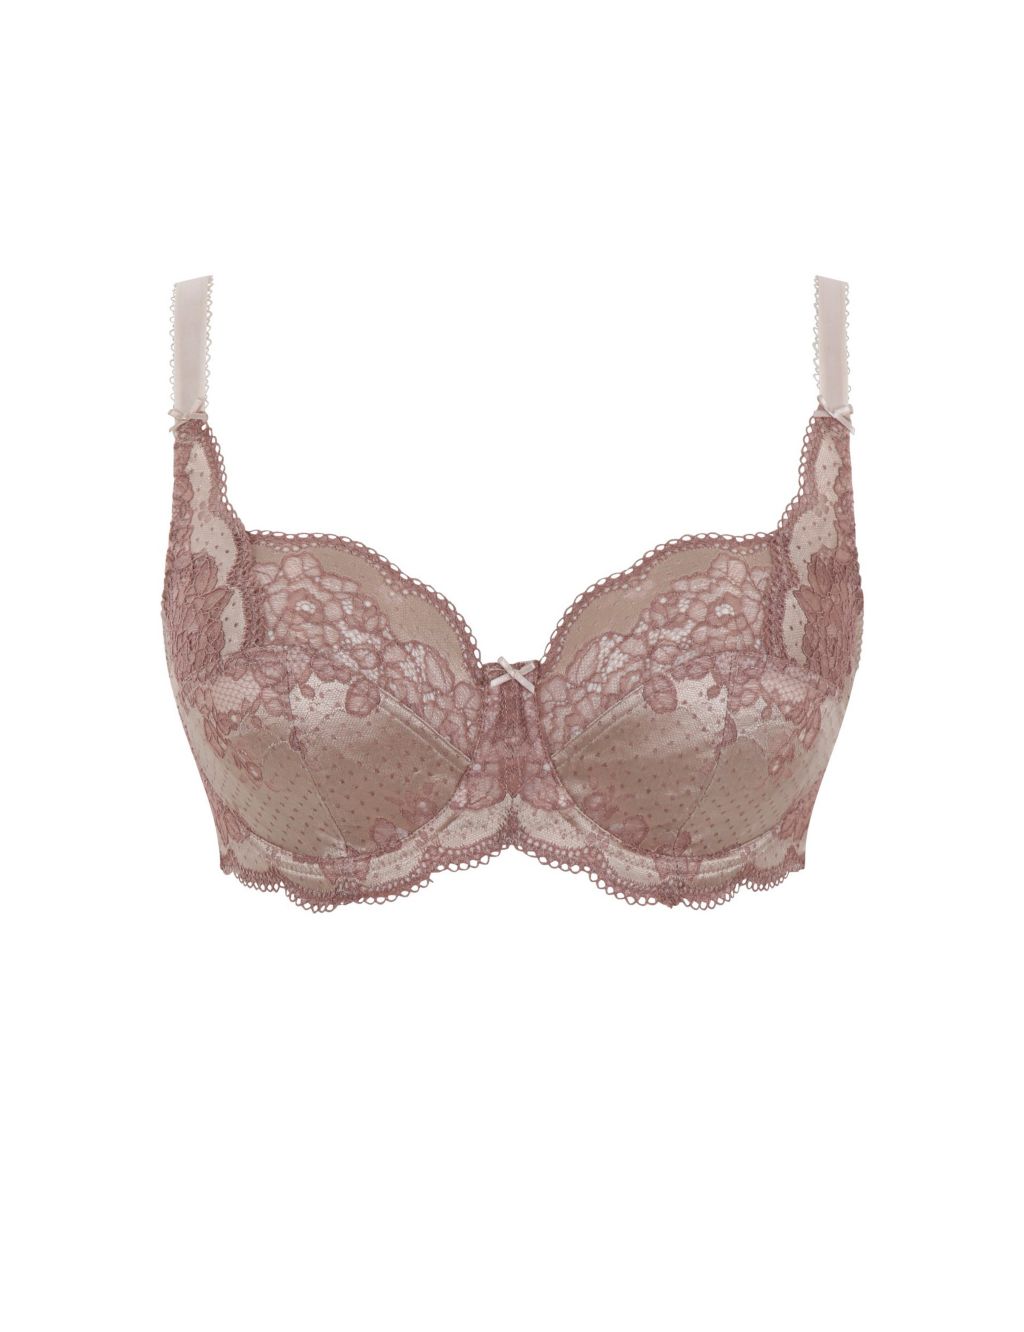 Clara Lace Wired Full Cup Bra image 2